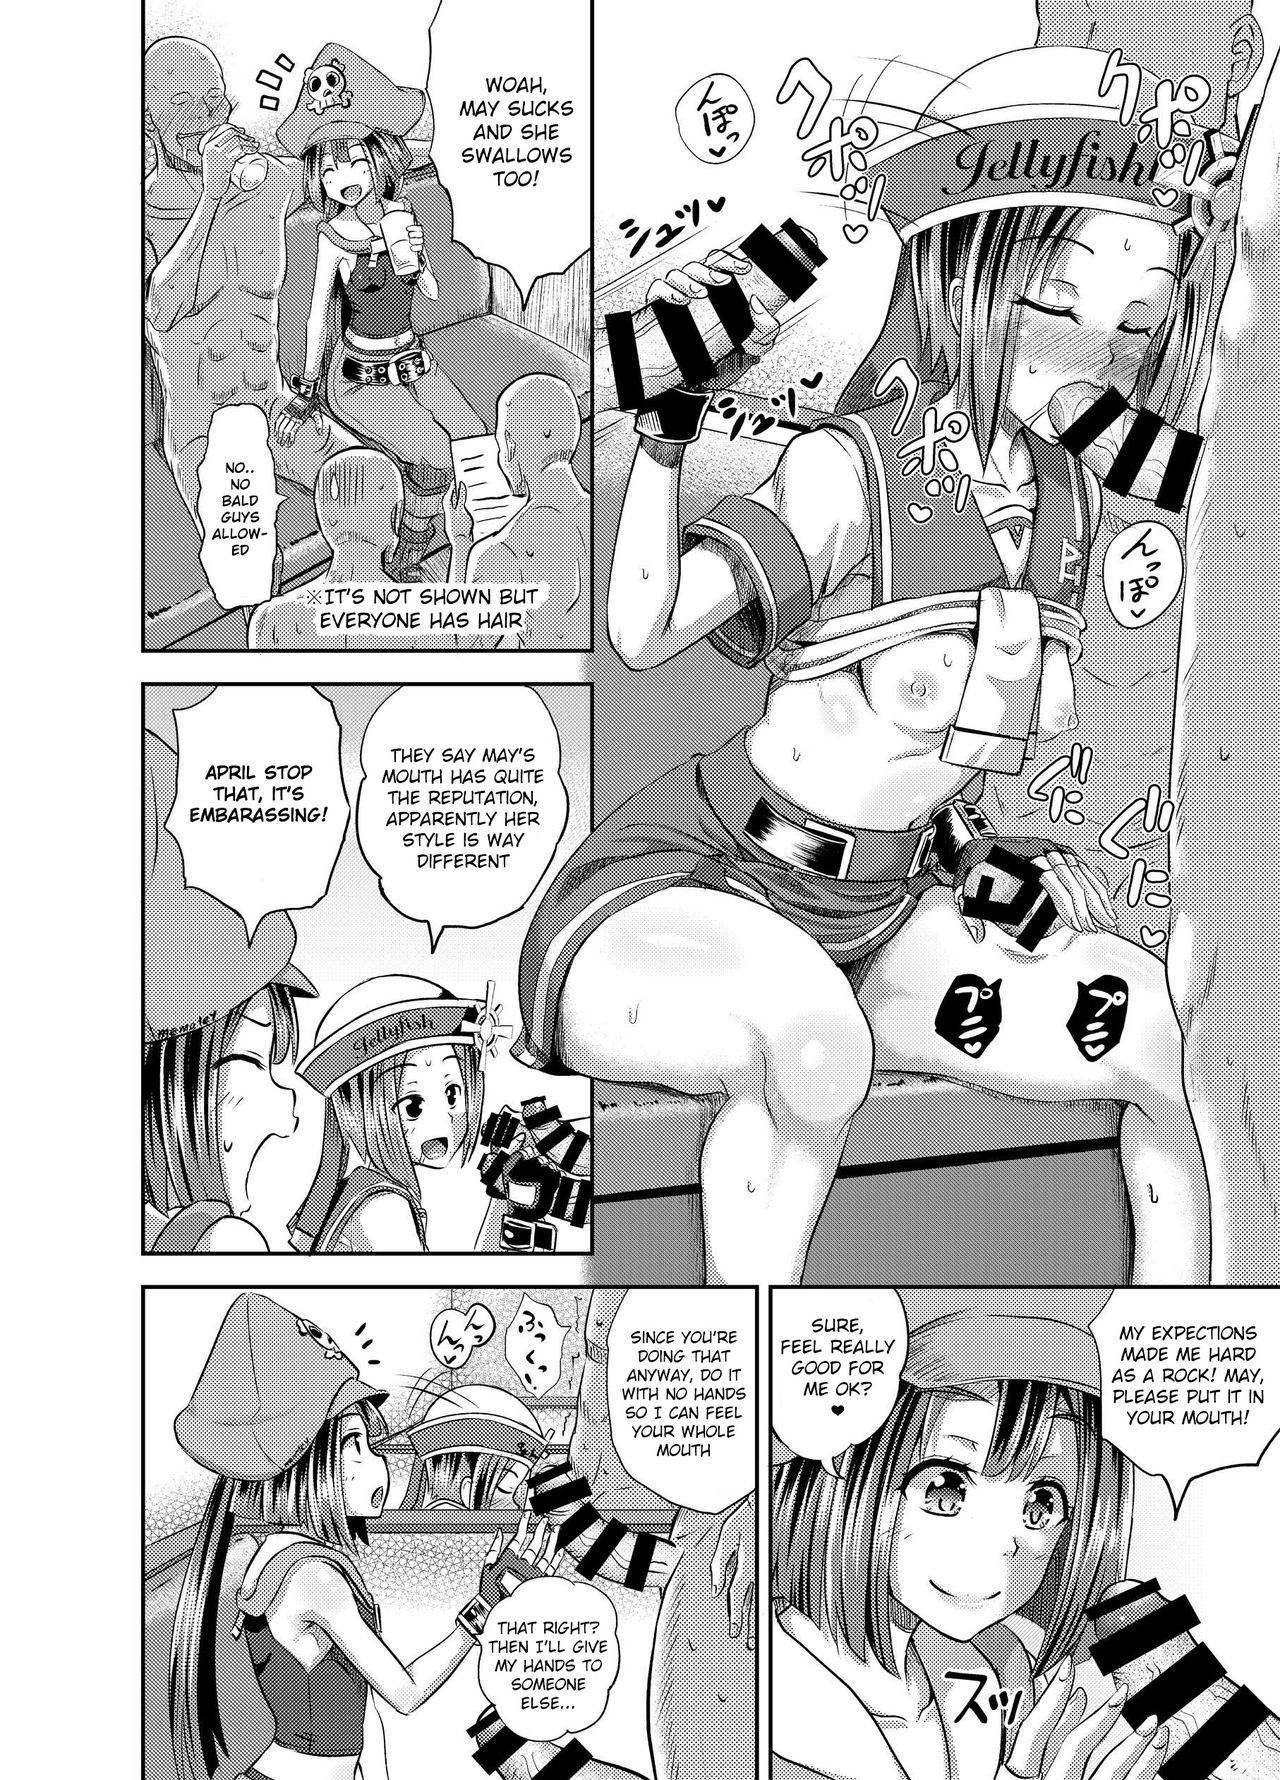 Cock Jellyfish Kaizokudan e Youkoso! | Welcome to The Jellyfish Pleasure Club! - Guilty gear Chunky - Page 5